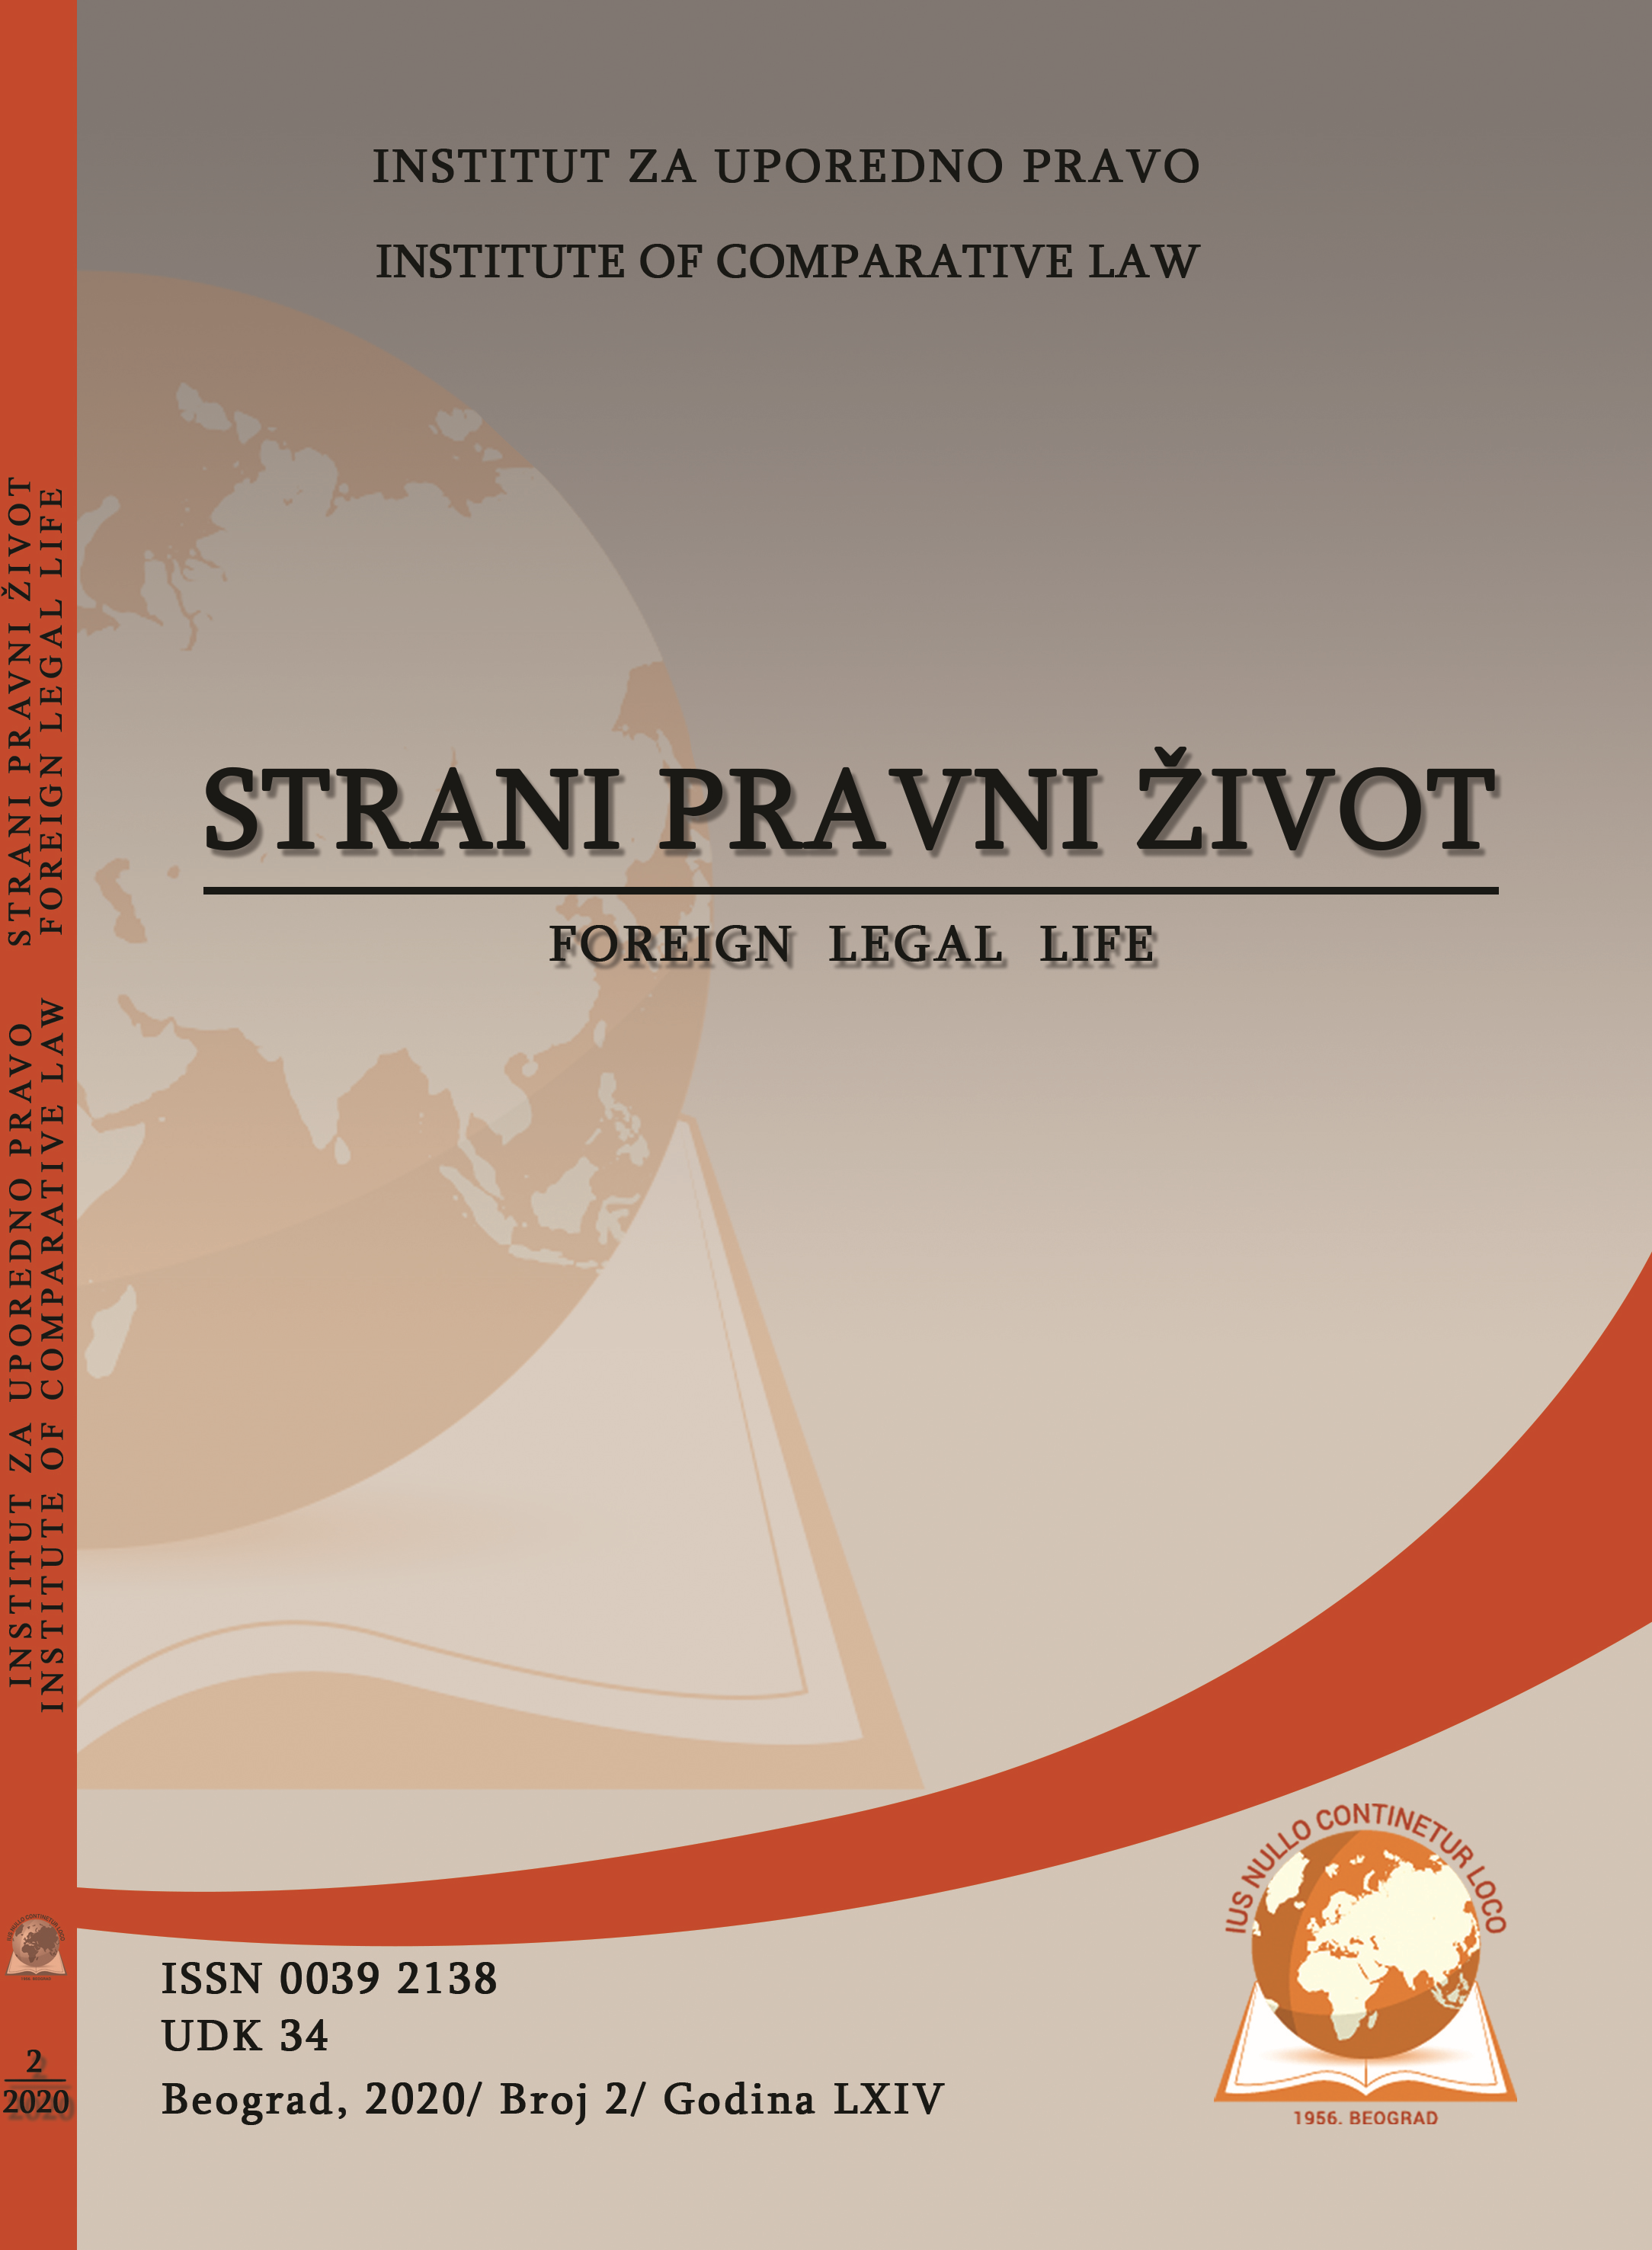 ARTICLE 8 OF THE CONVENTION FOR THE PROTECTION OF HUMAN RIGHTS AND FUNDAMENTAL FREEDOMS AND THE RIGHT TO PRIVACY IN THE CONSTITUTION OF MONTENEGRO Cover Image